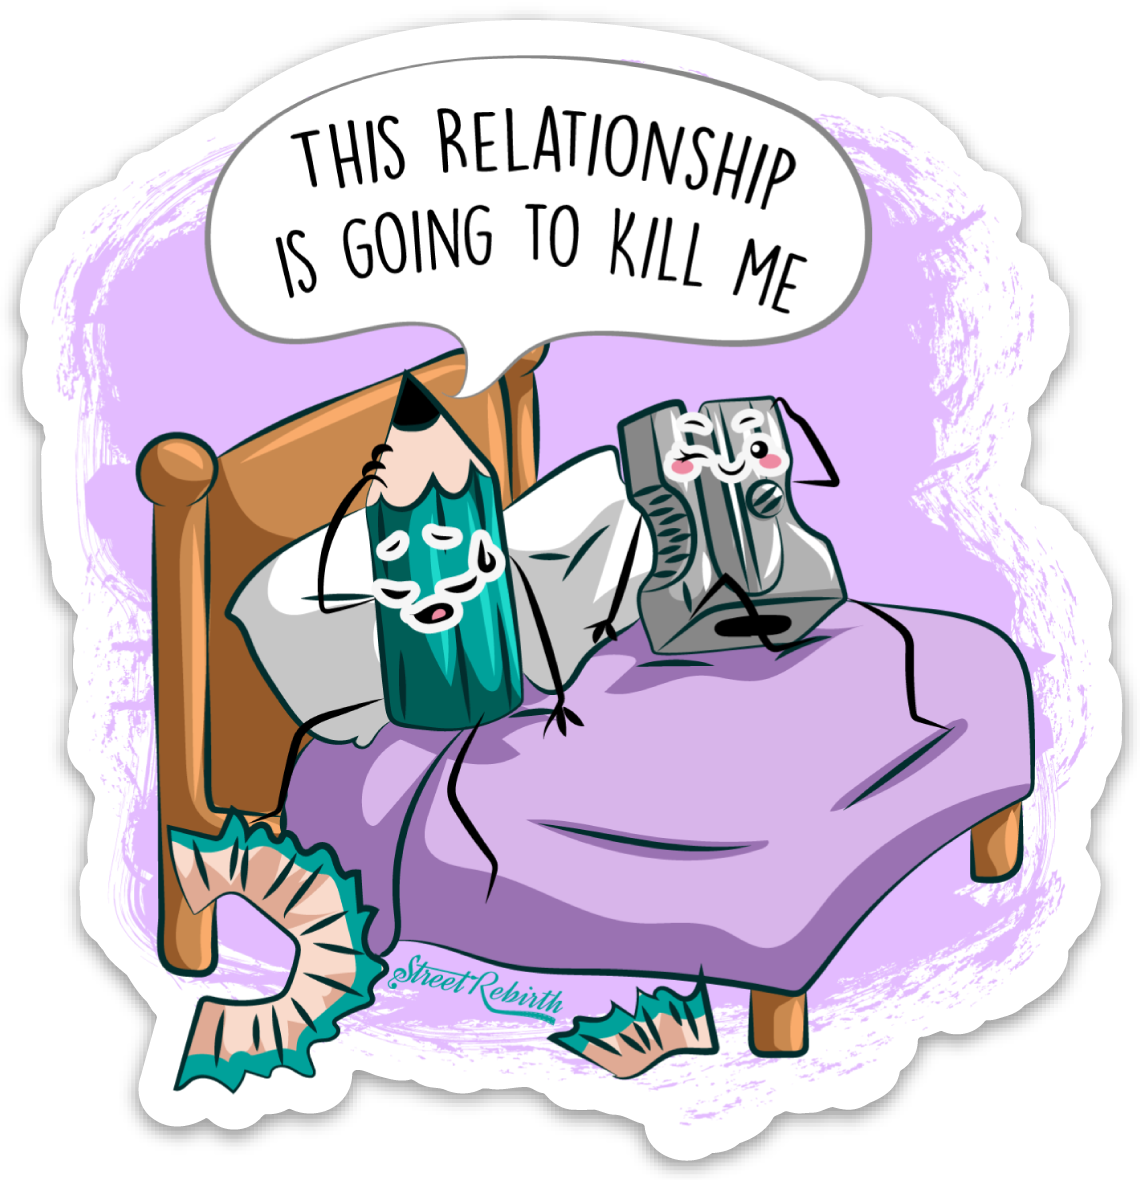 This Relationship Is Going to Kill Me PUN STICKER – ONE 4 INCH WATER PROOF VINYL STICKER – FOR HYDRO FLASK, SKATEBOARD, LAPTOP, PLANNER, CAR, COLLECTING, GIFTING